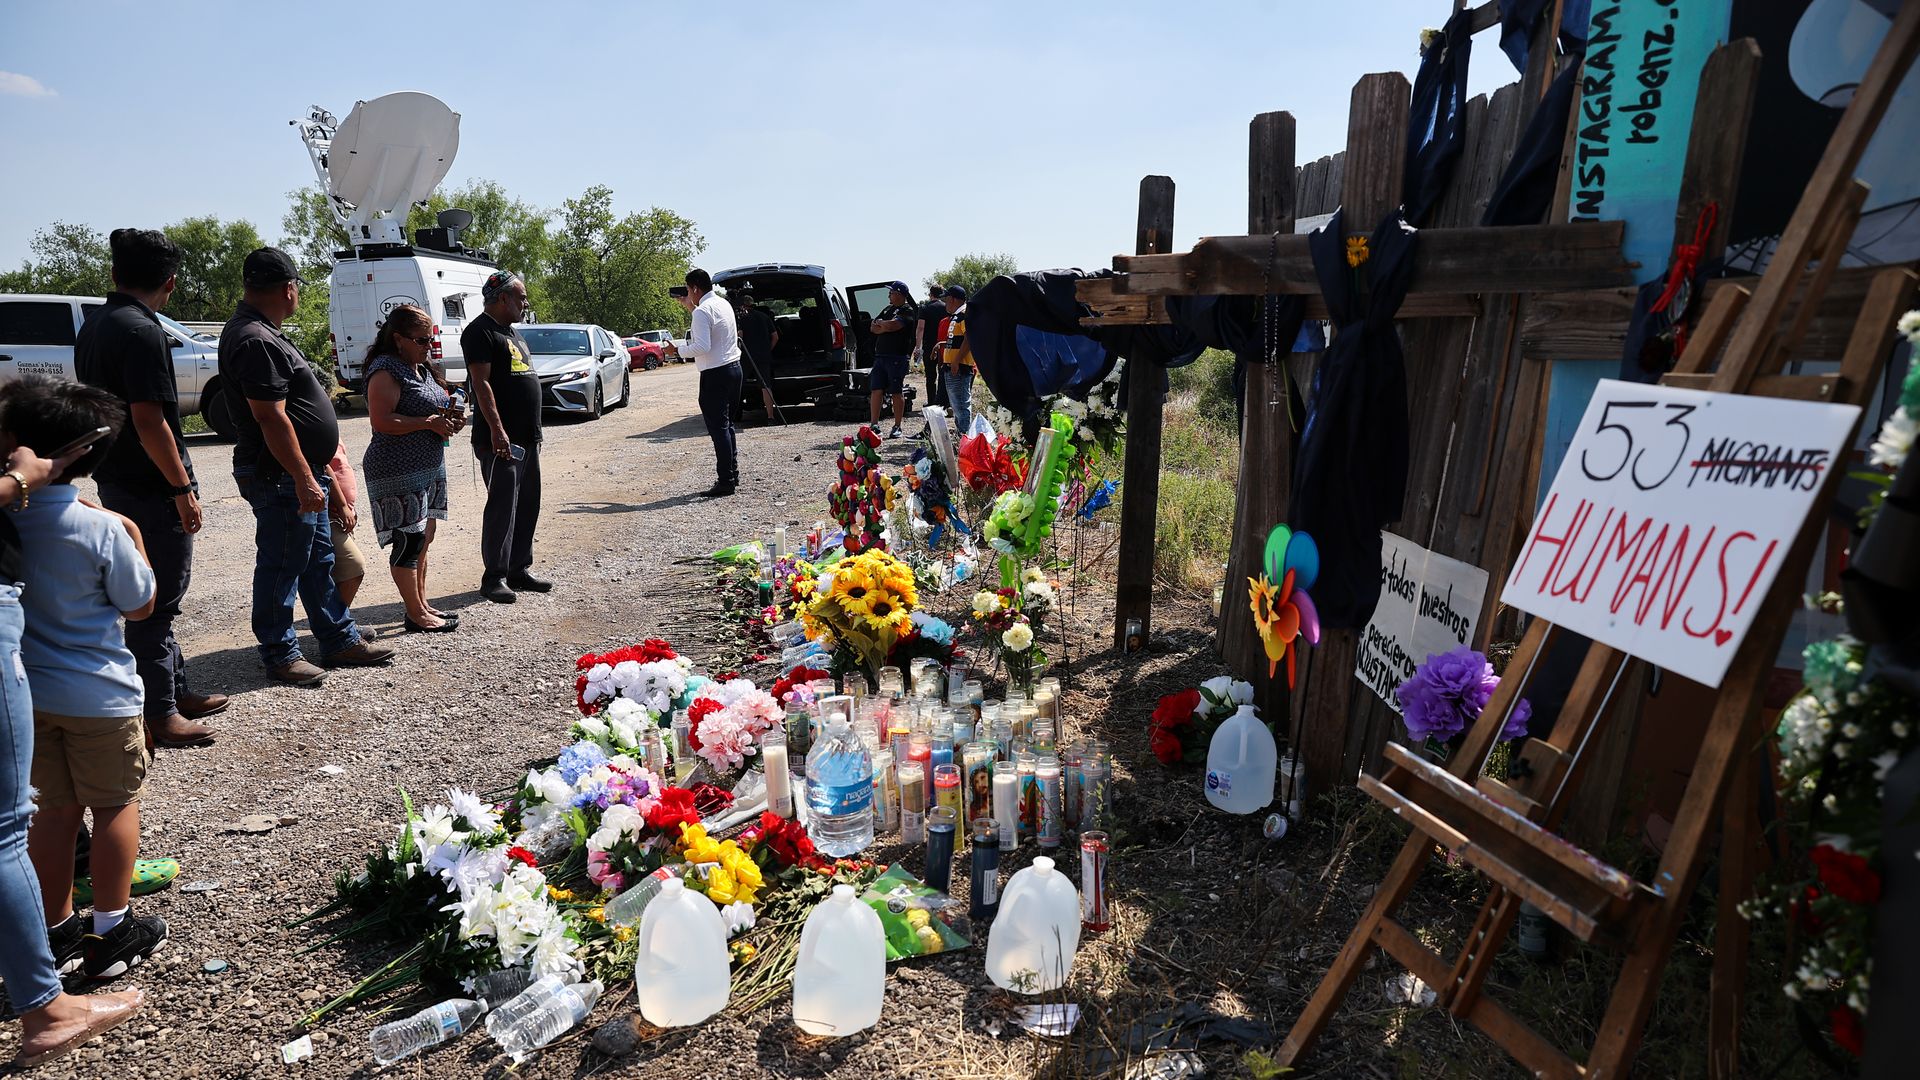  People ommemorate as they leave flowers, candles and water, where dozens of dead migrants found in a truck in San Antonio, Texas, United States on June 29.